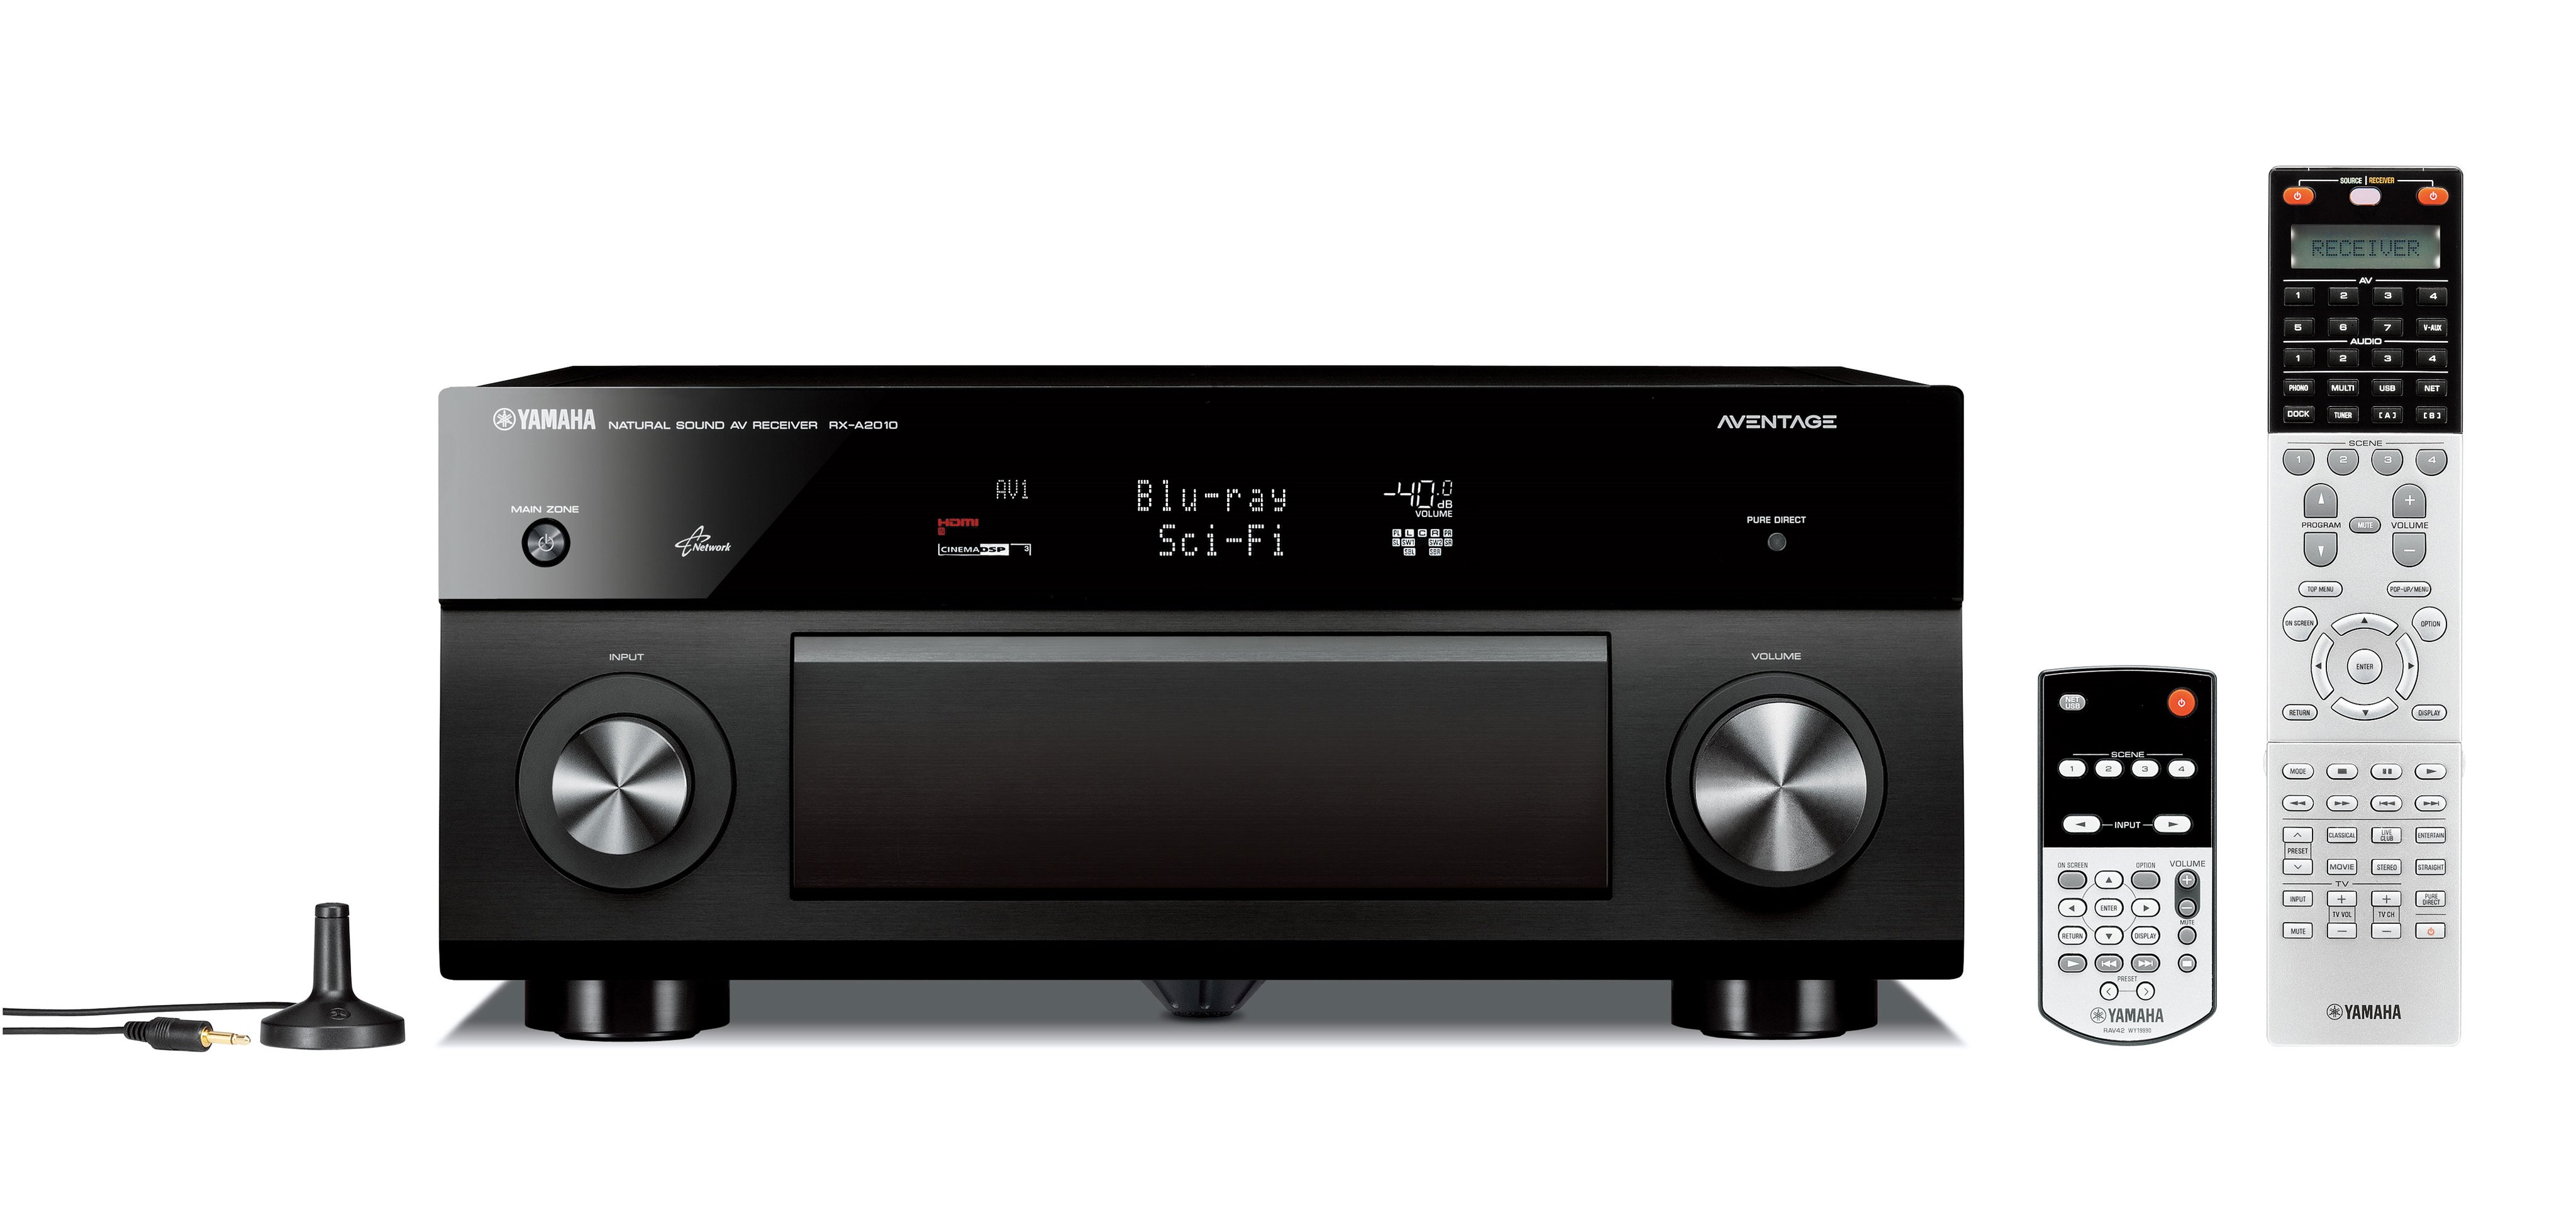 RX-A2010 - Overview - AV Receivers - Audio & Visual - Products